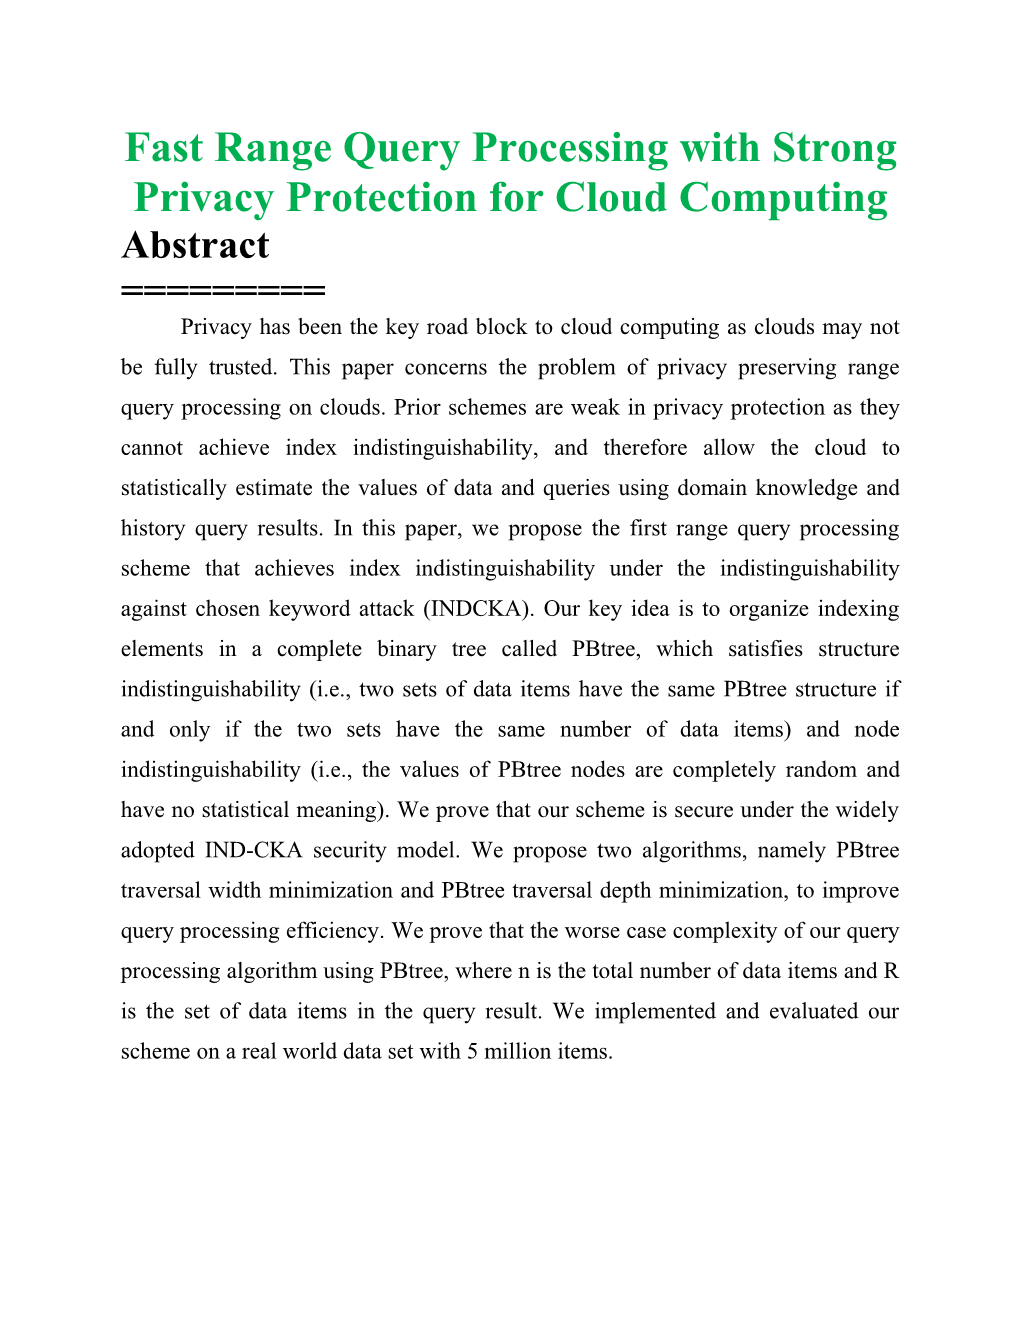 Fast Range Query Processing with Strong Privacy Protection for Cloud Computing